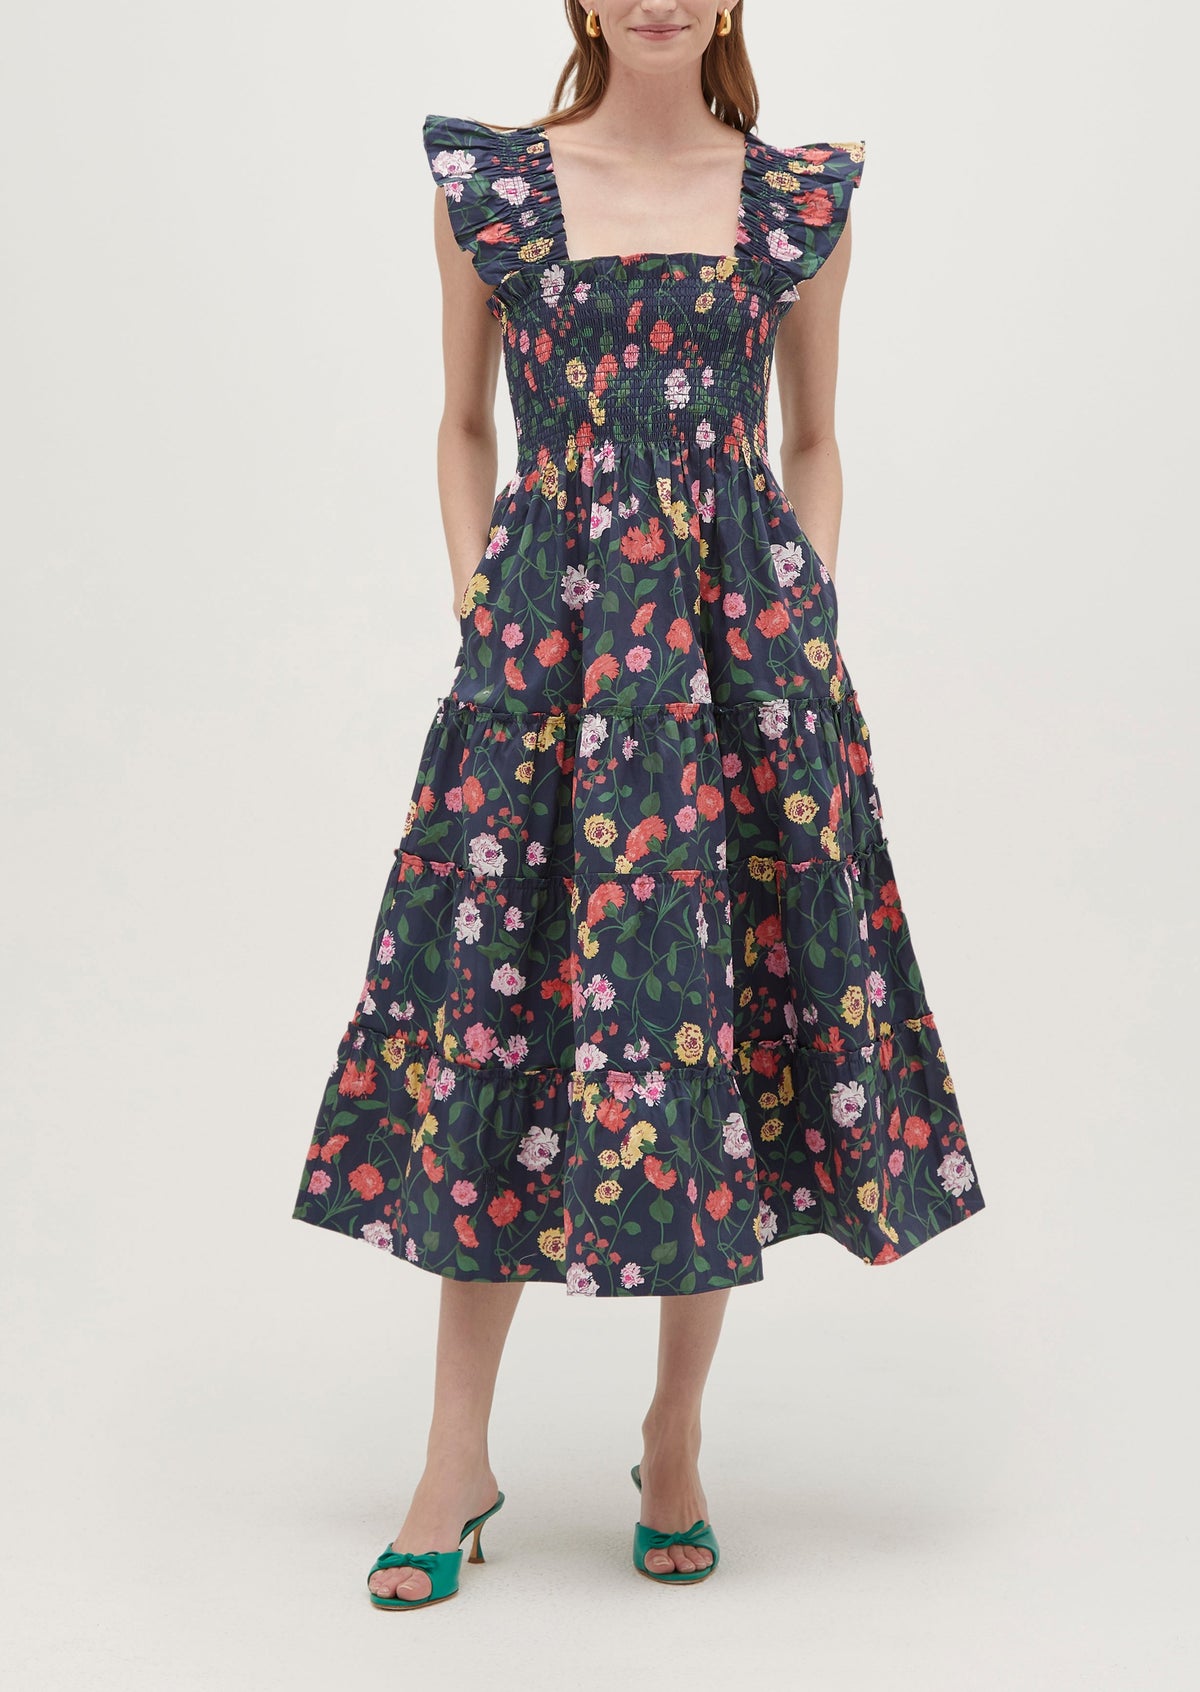 Ava is 5’9” and wears a size XS in the Navy Peony Bouquet Cotton Sateen color: Navy Peony Bouquet Cotton Sateen